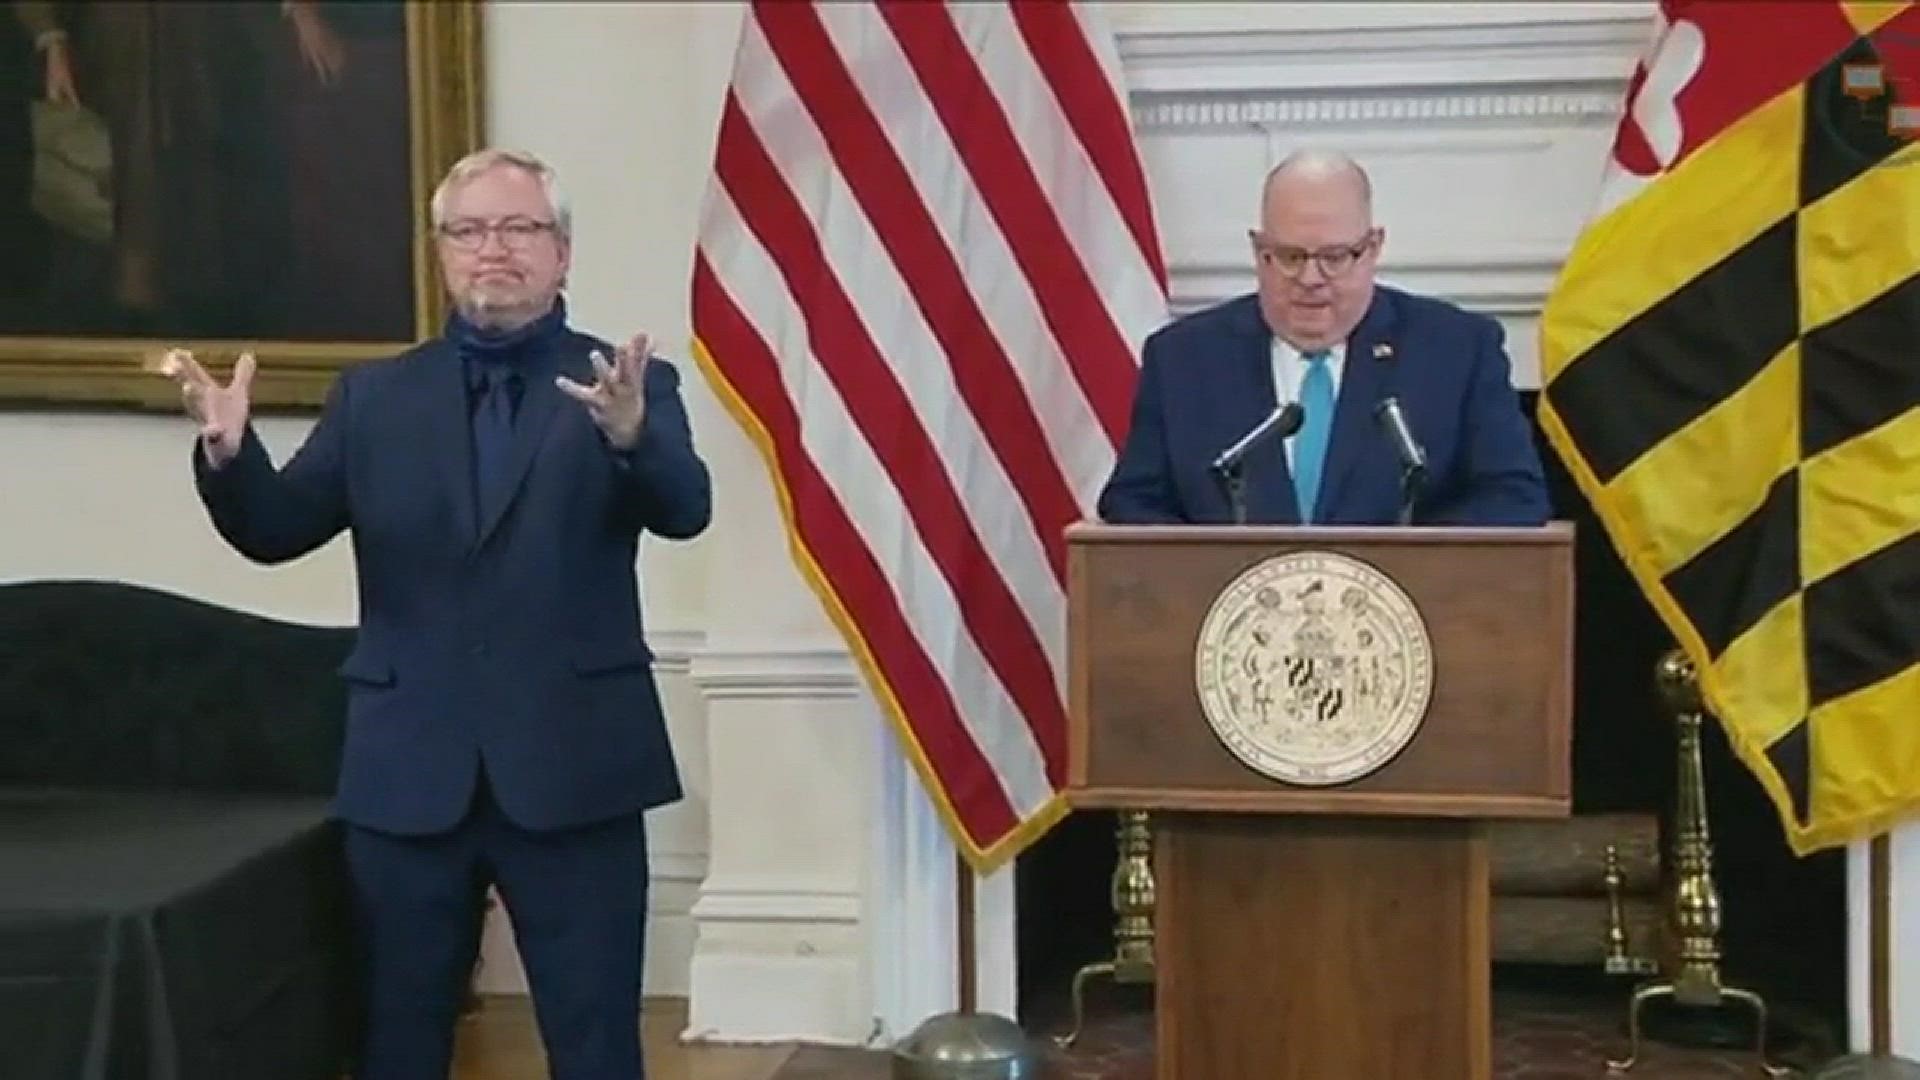 Governor Larry Hogan acknowledged that not all counties, including Prince George's and Montgomery, feel ready to reopen and said they should do so at their own pace.